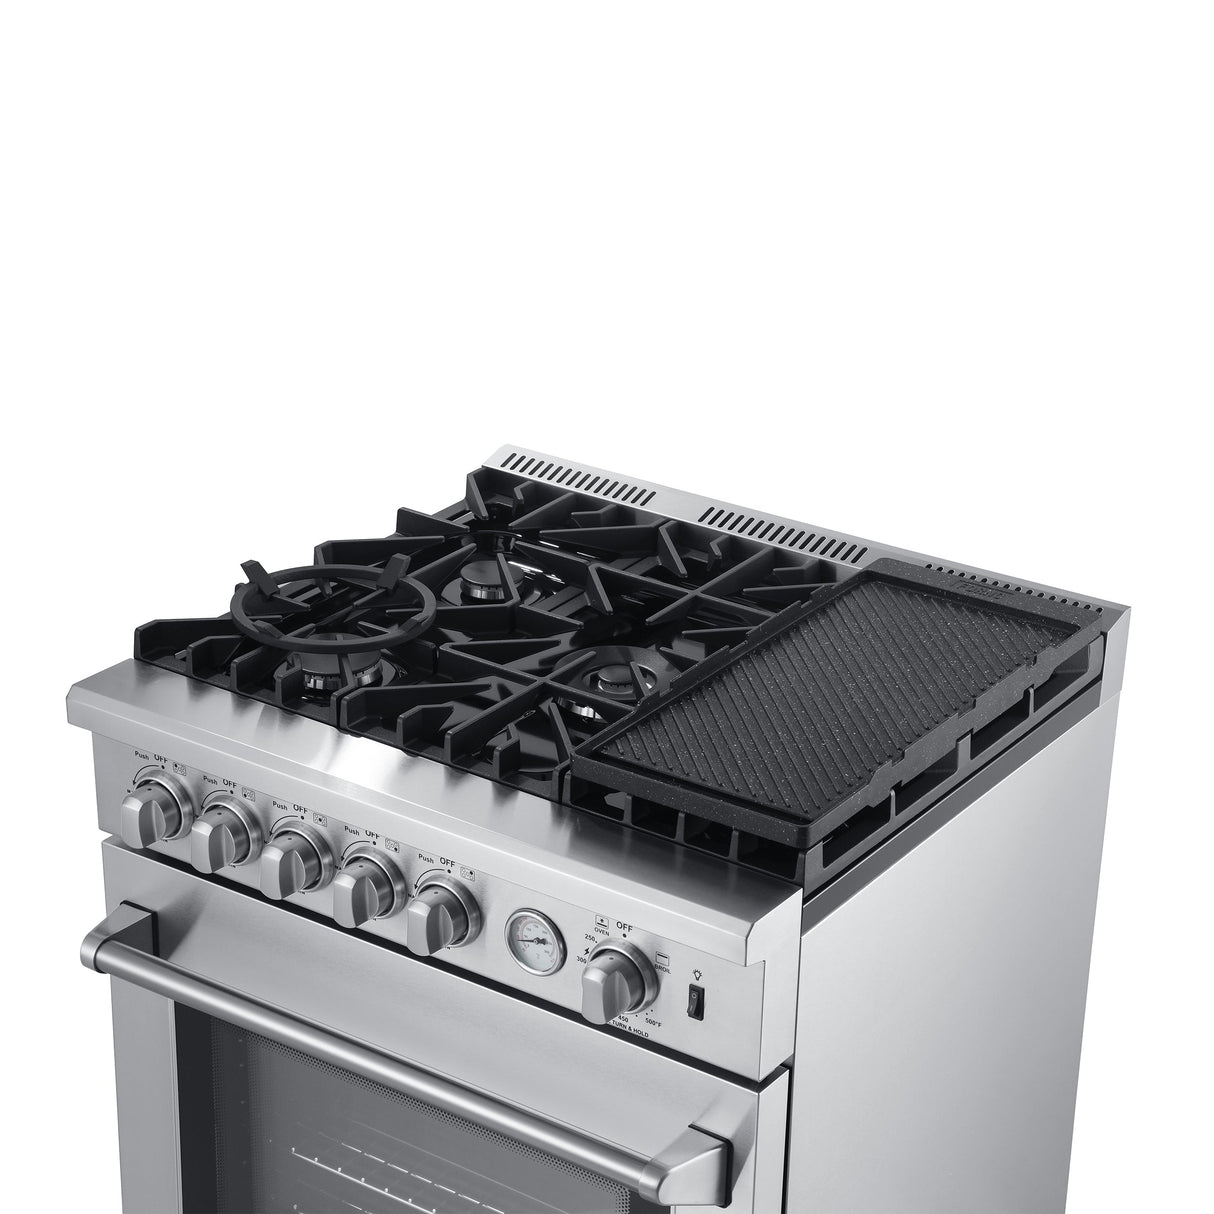 Forno 30-Inch Lazio Gas Range with 5 Sealed Burner, Air Fryer, Wok Ring, & Reversible Griddle in Stainless Steel (FFSGS6276-30)